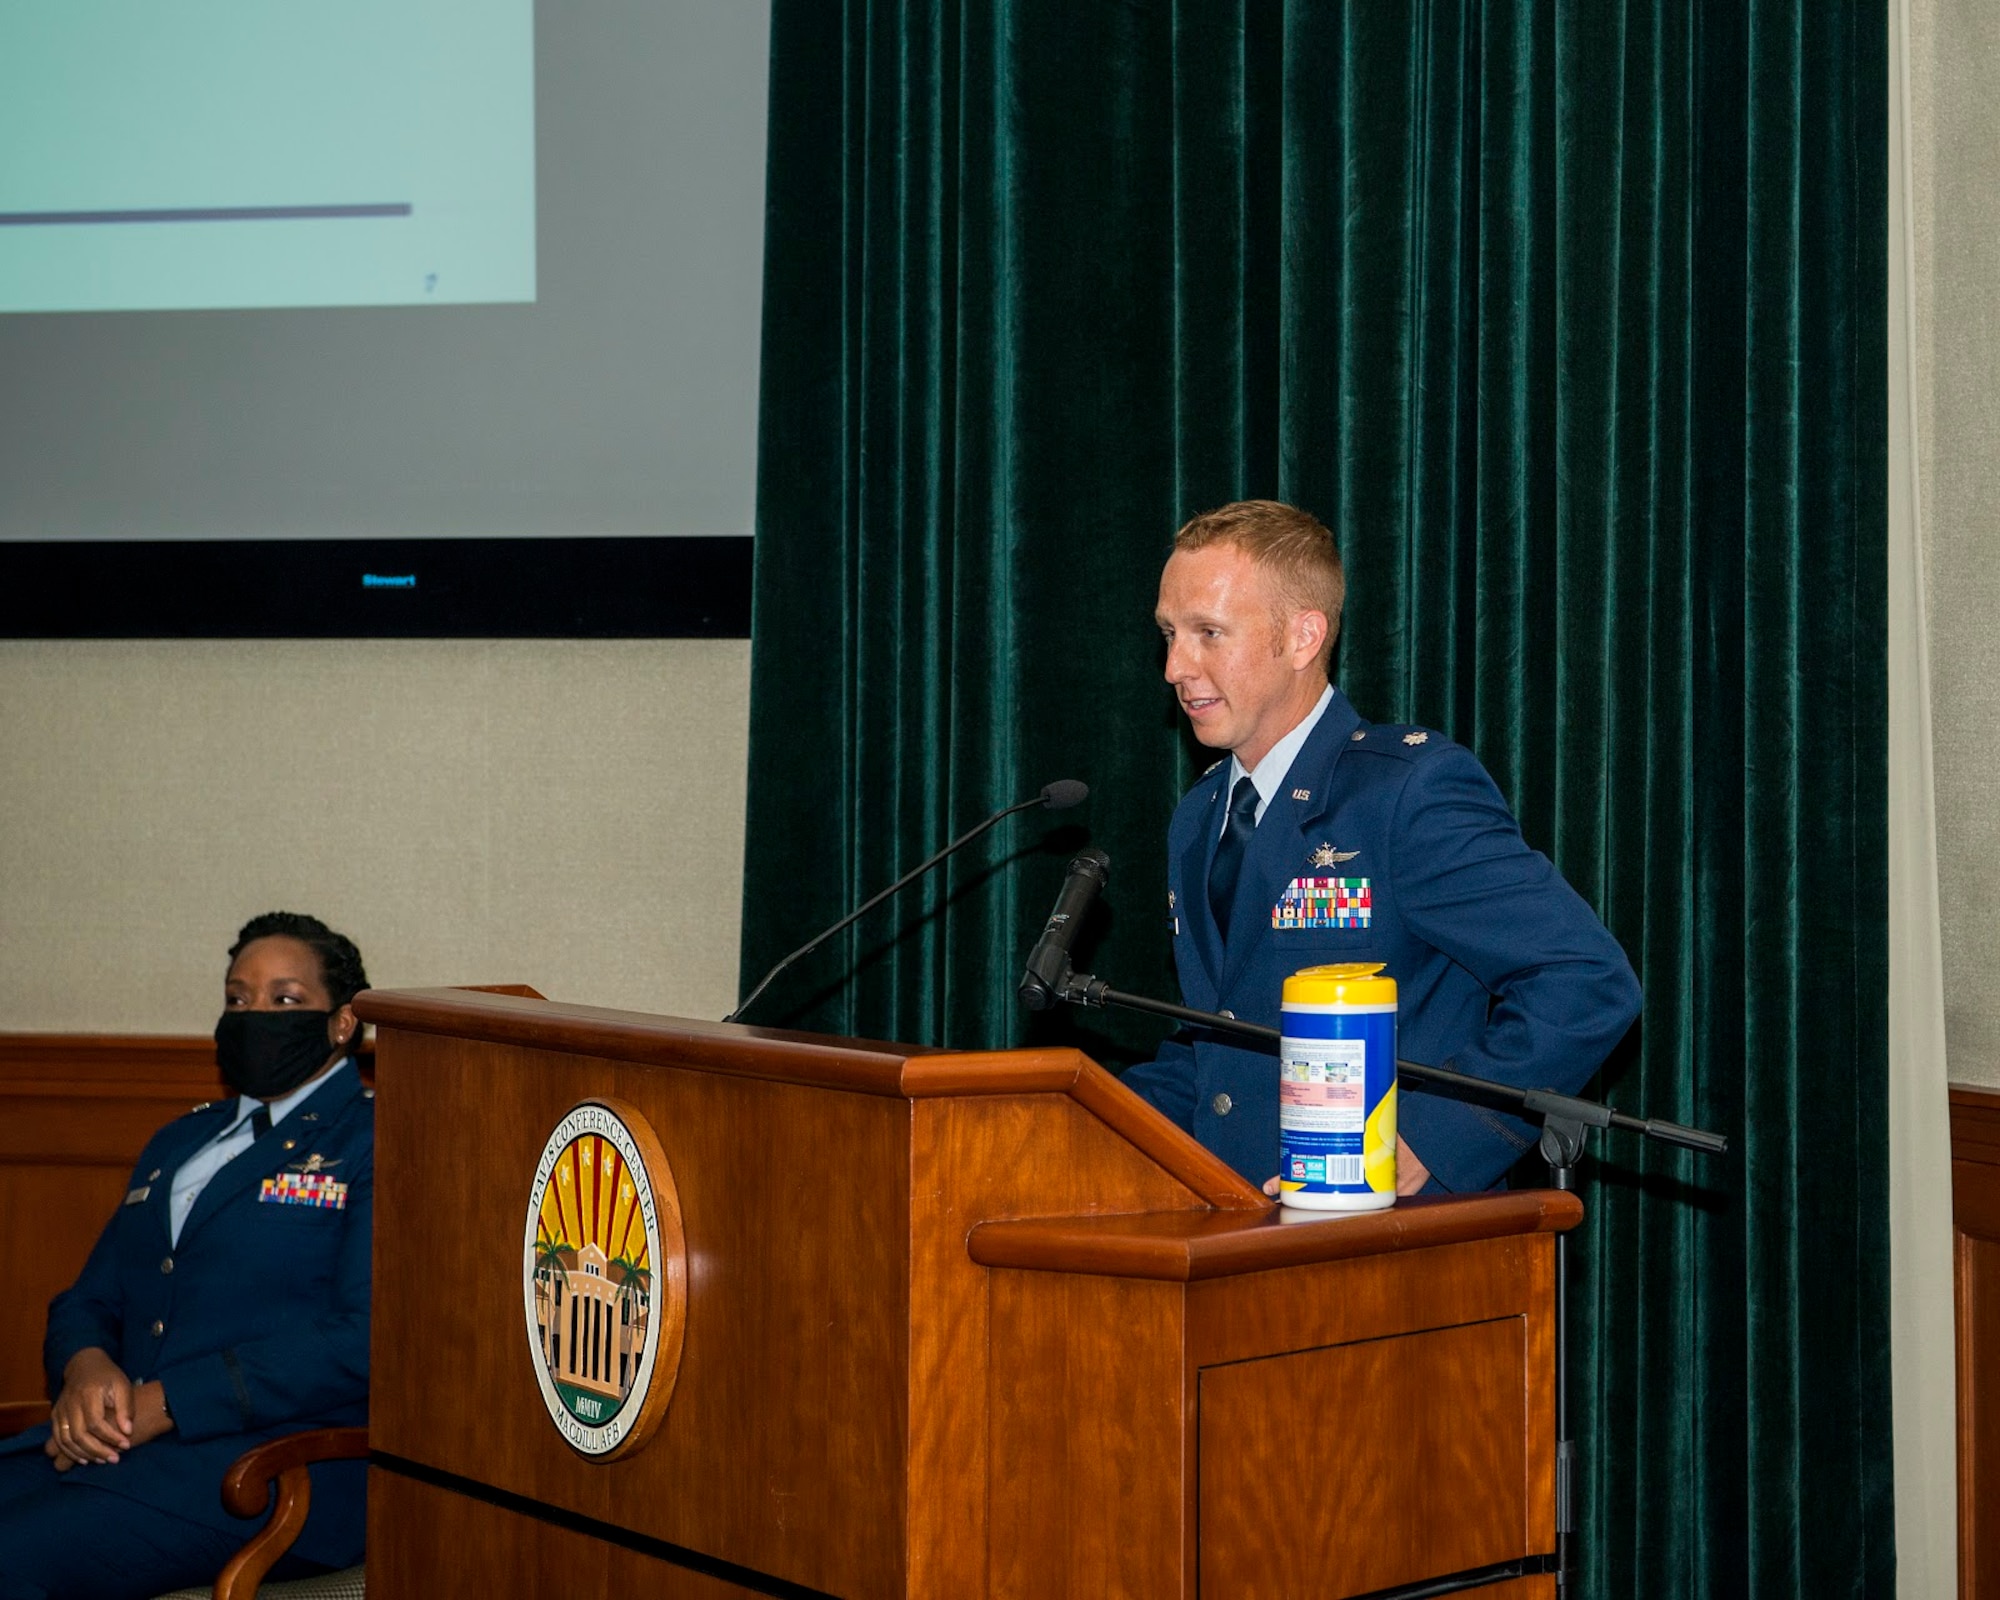 U.S. Air Force Lt. Col. Justin Ellsworth, newly appointed 6th Communications Squadron (CS) commander, speaks at the 6th CS Change of Command at MacDill Air Force Base, Fla., Jun. 22, 2020.